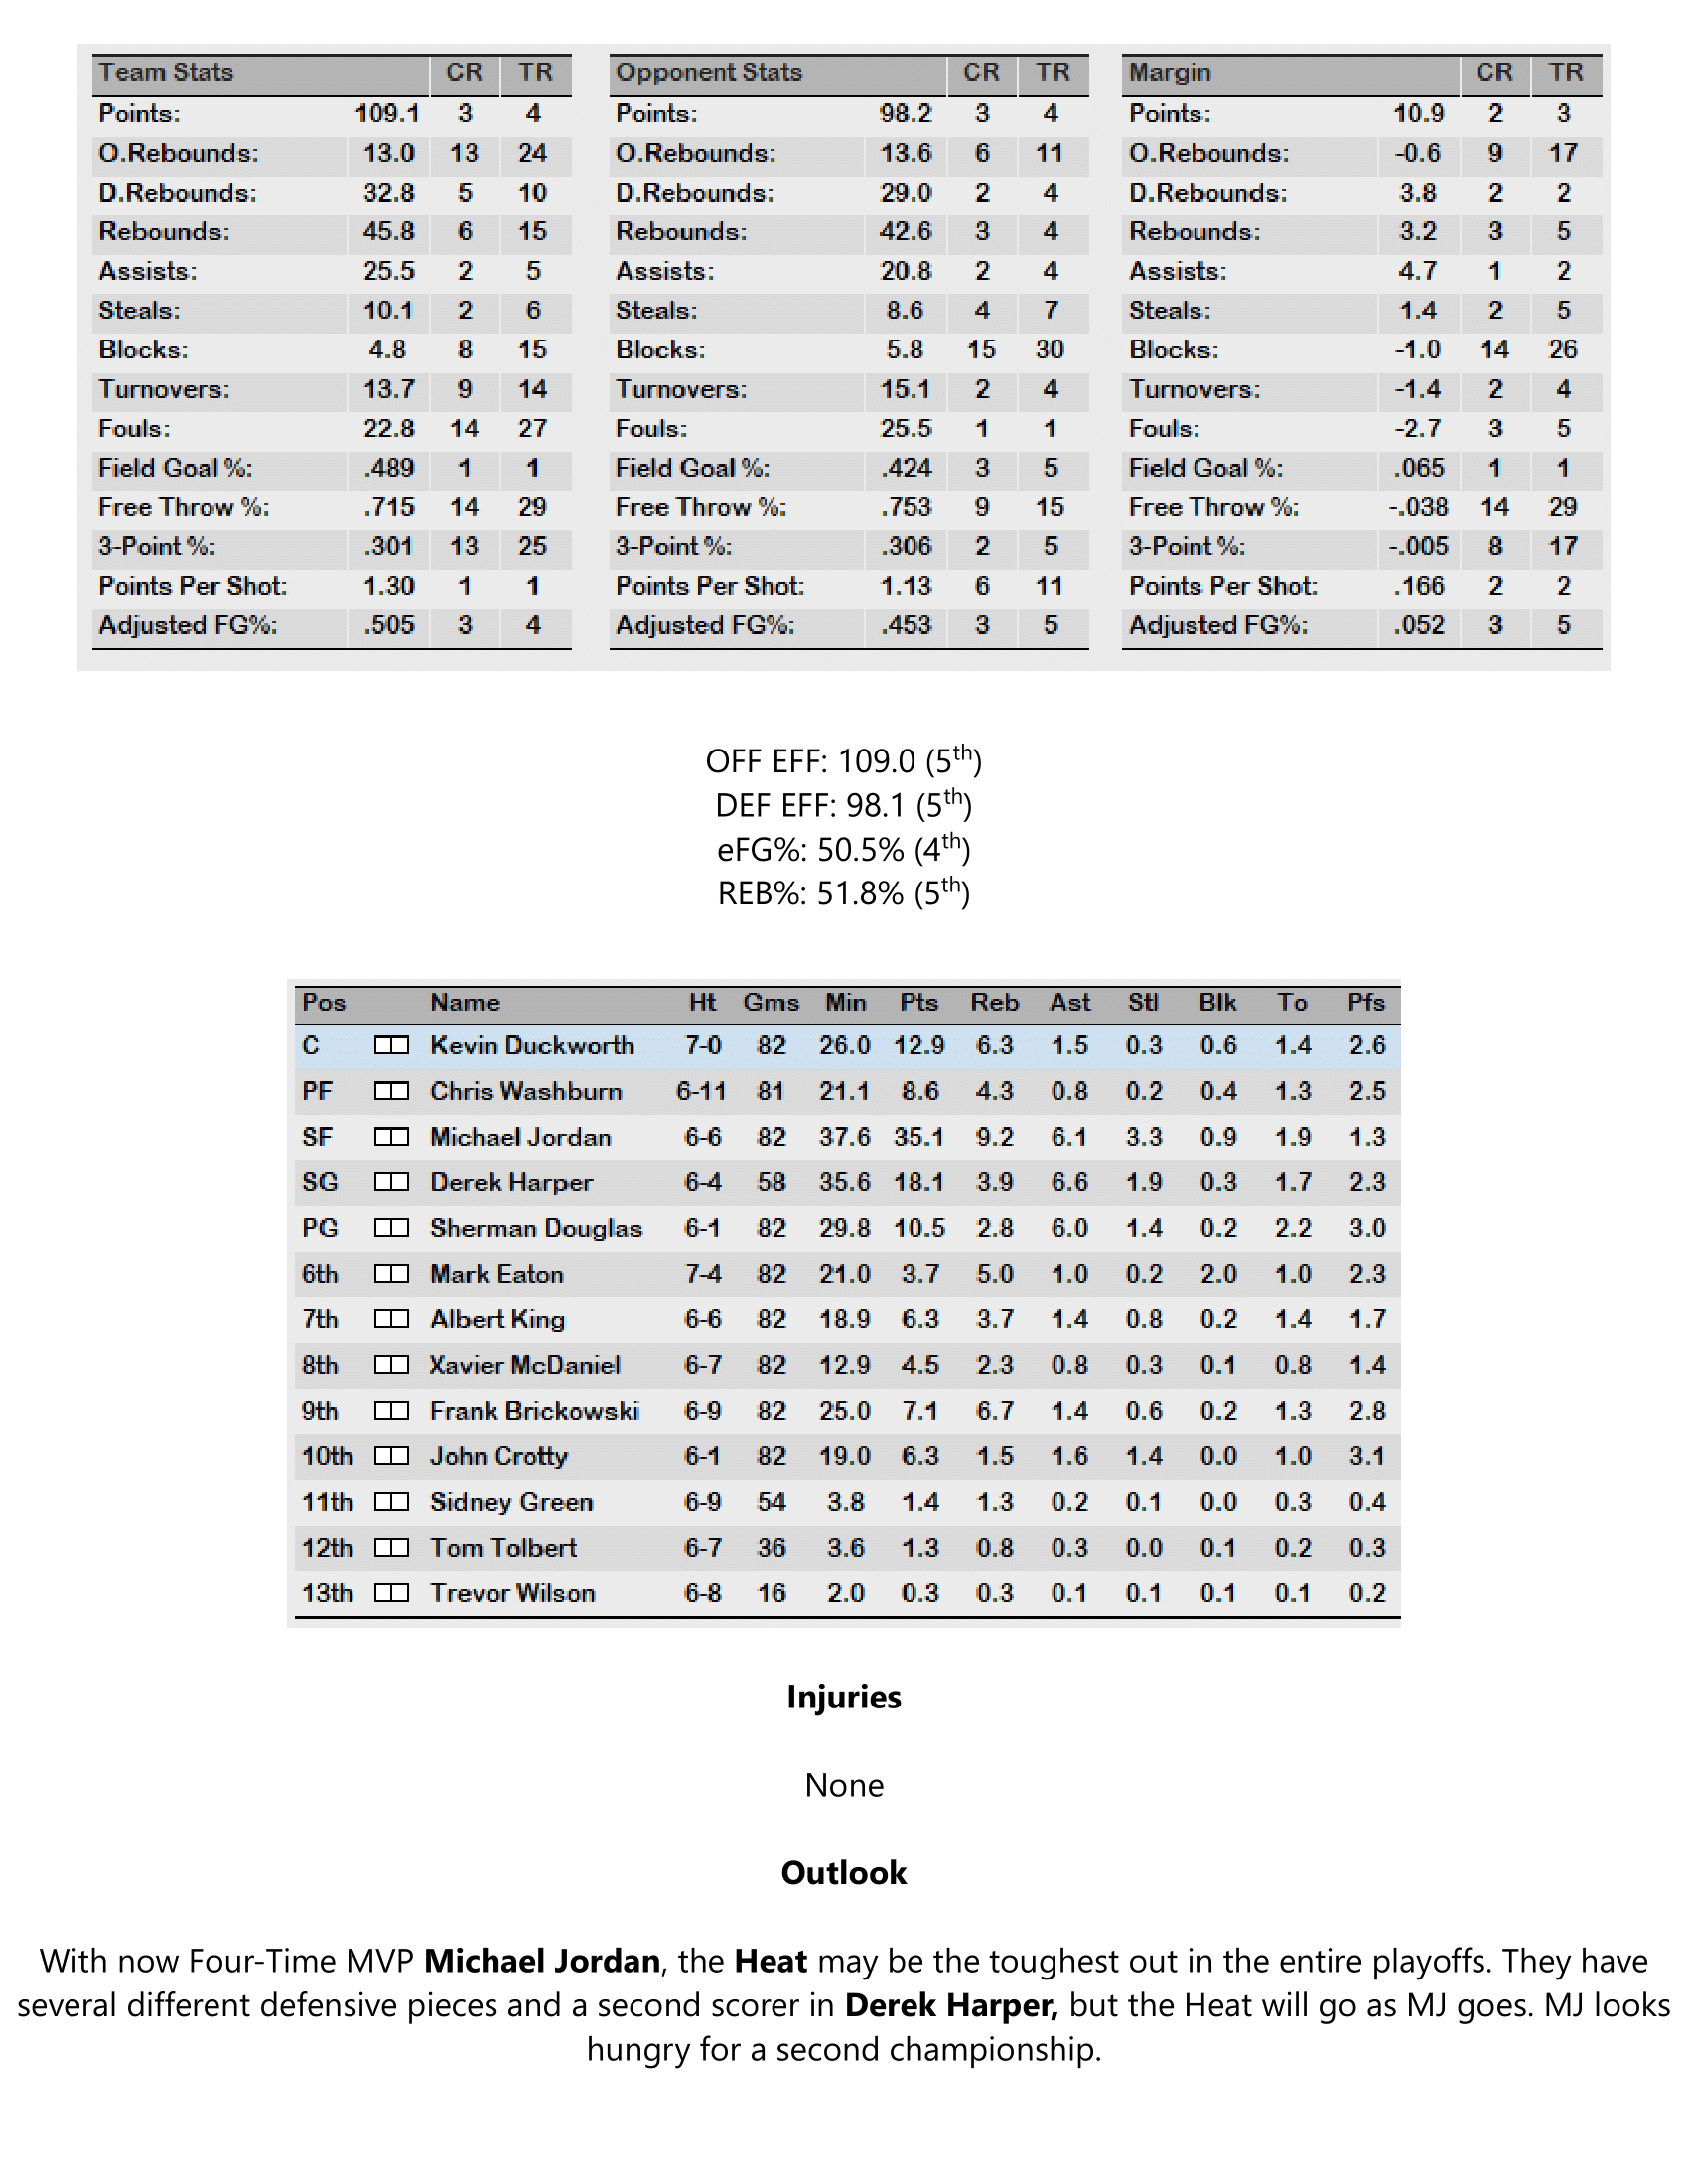 91-92-Part-4-Playoff-Preview-16.png